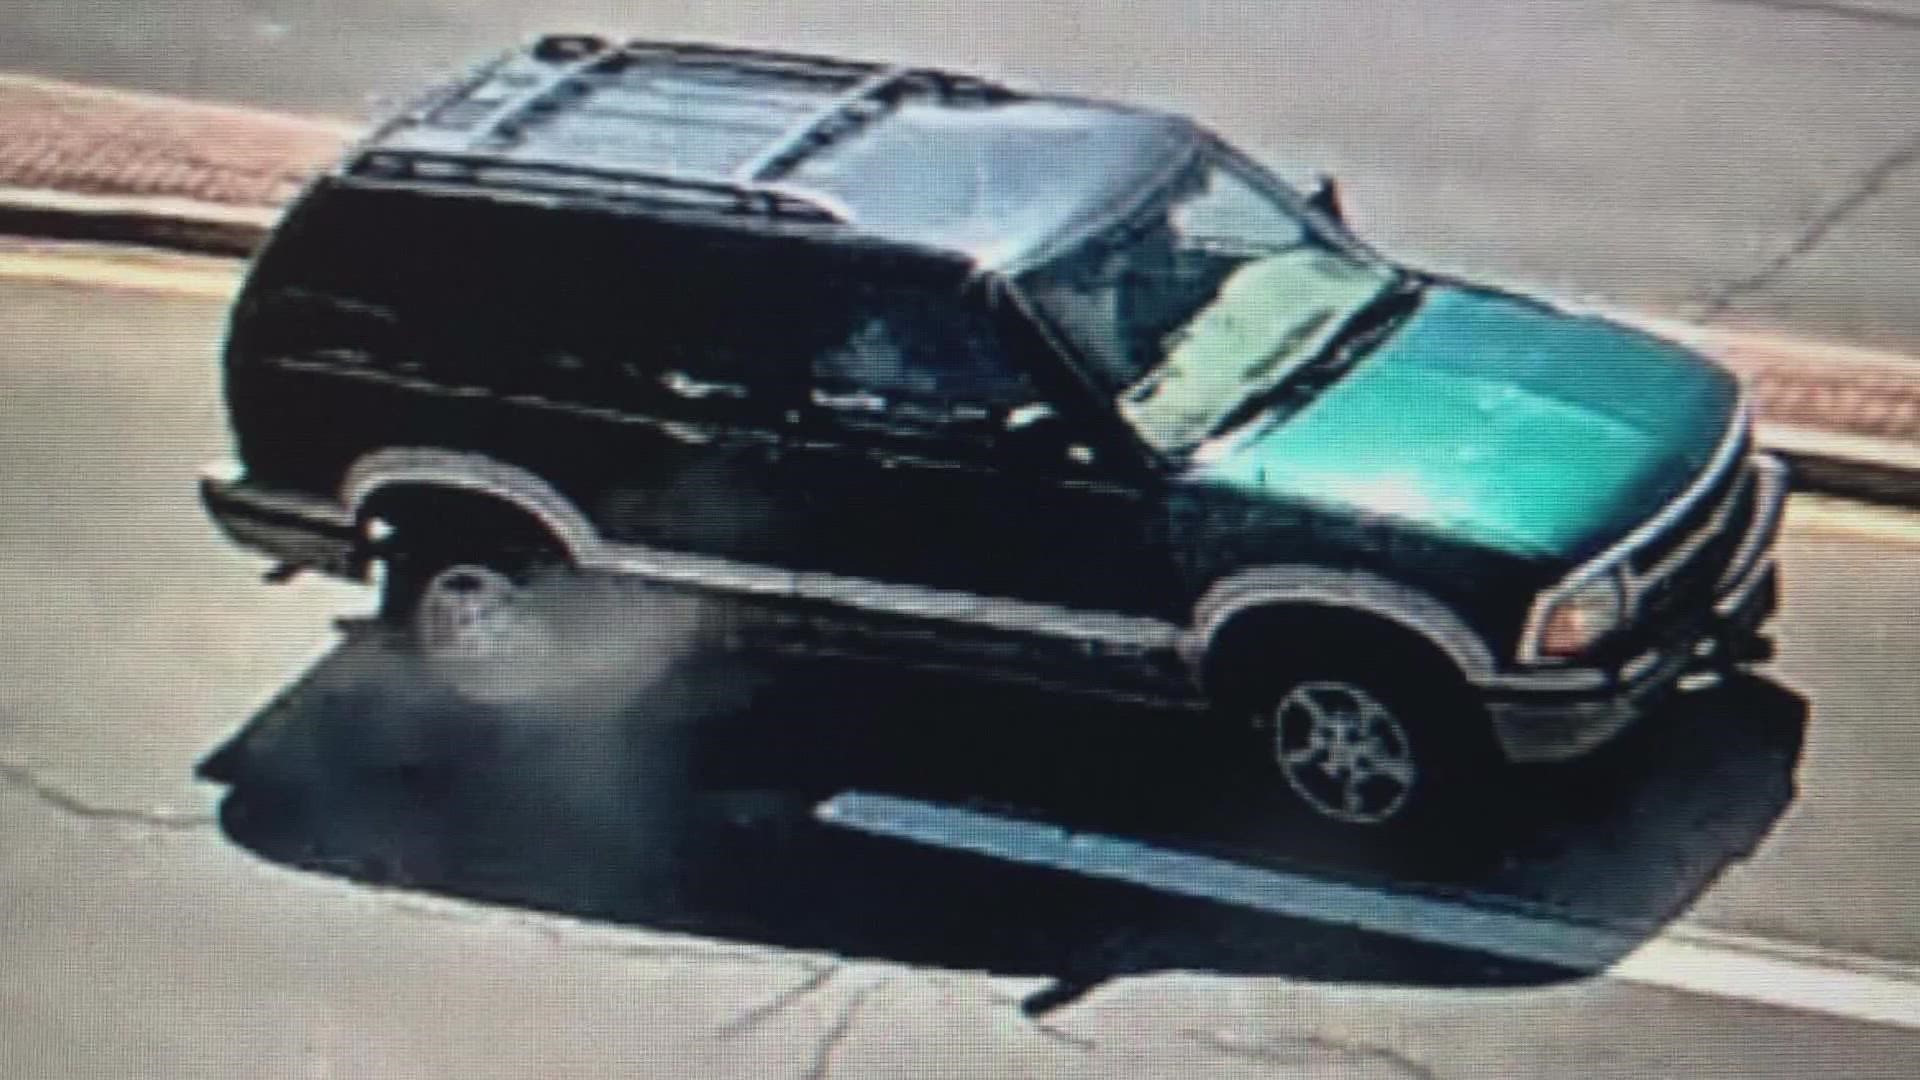 Investigators now say the suspect's vehicle was covered in a fresh coat of red spray paint when it was found.